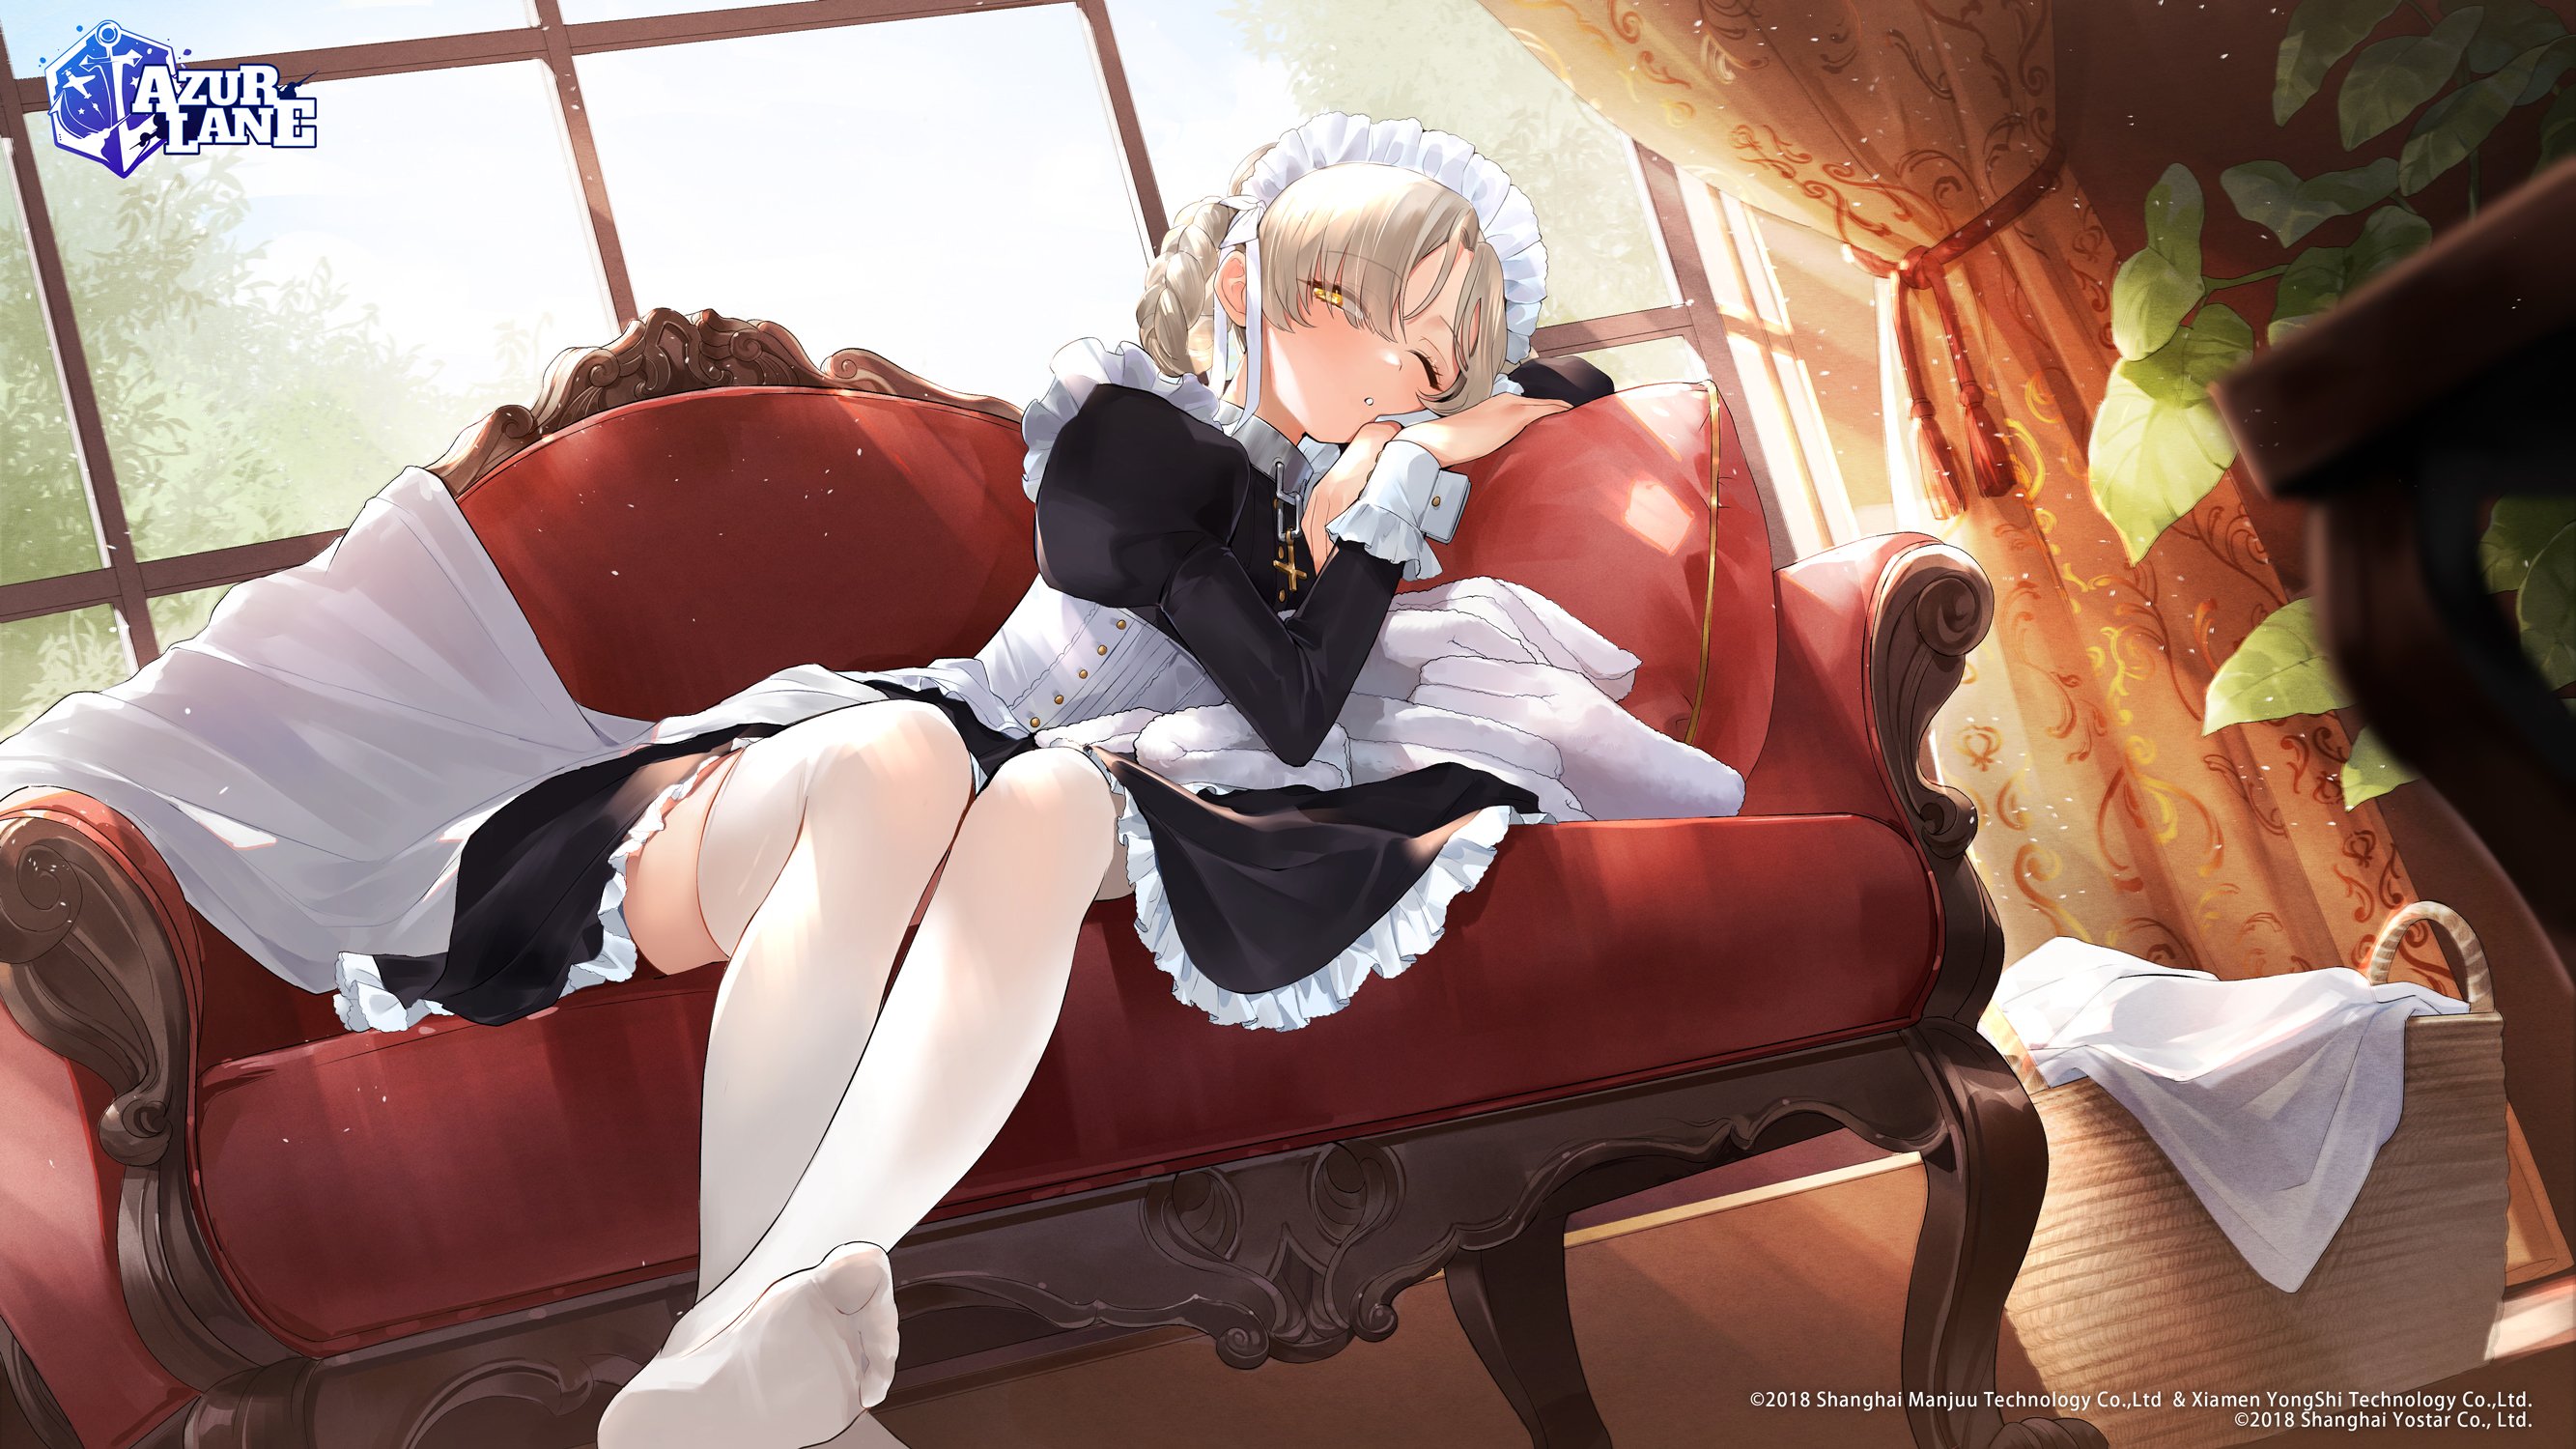 Anime 2667x1500 Sheffield (Azur Lane) Azur Lane maid outfit anime girls sitting couch watermarked logo one eye closed stockings maid sunlight leaves looking at viewer braids blonde yellow eyes window